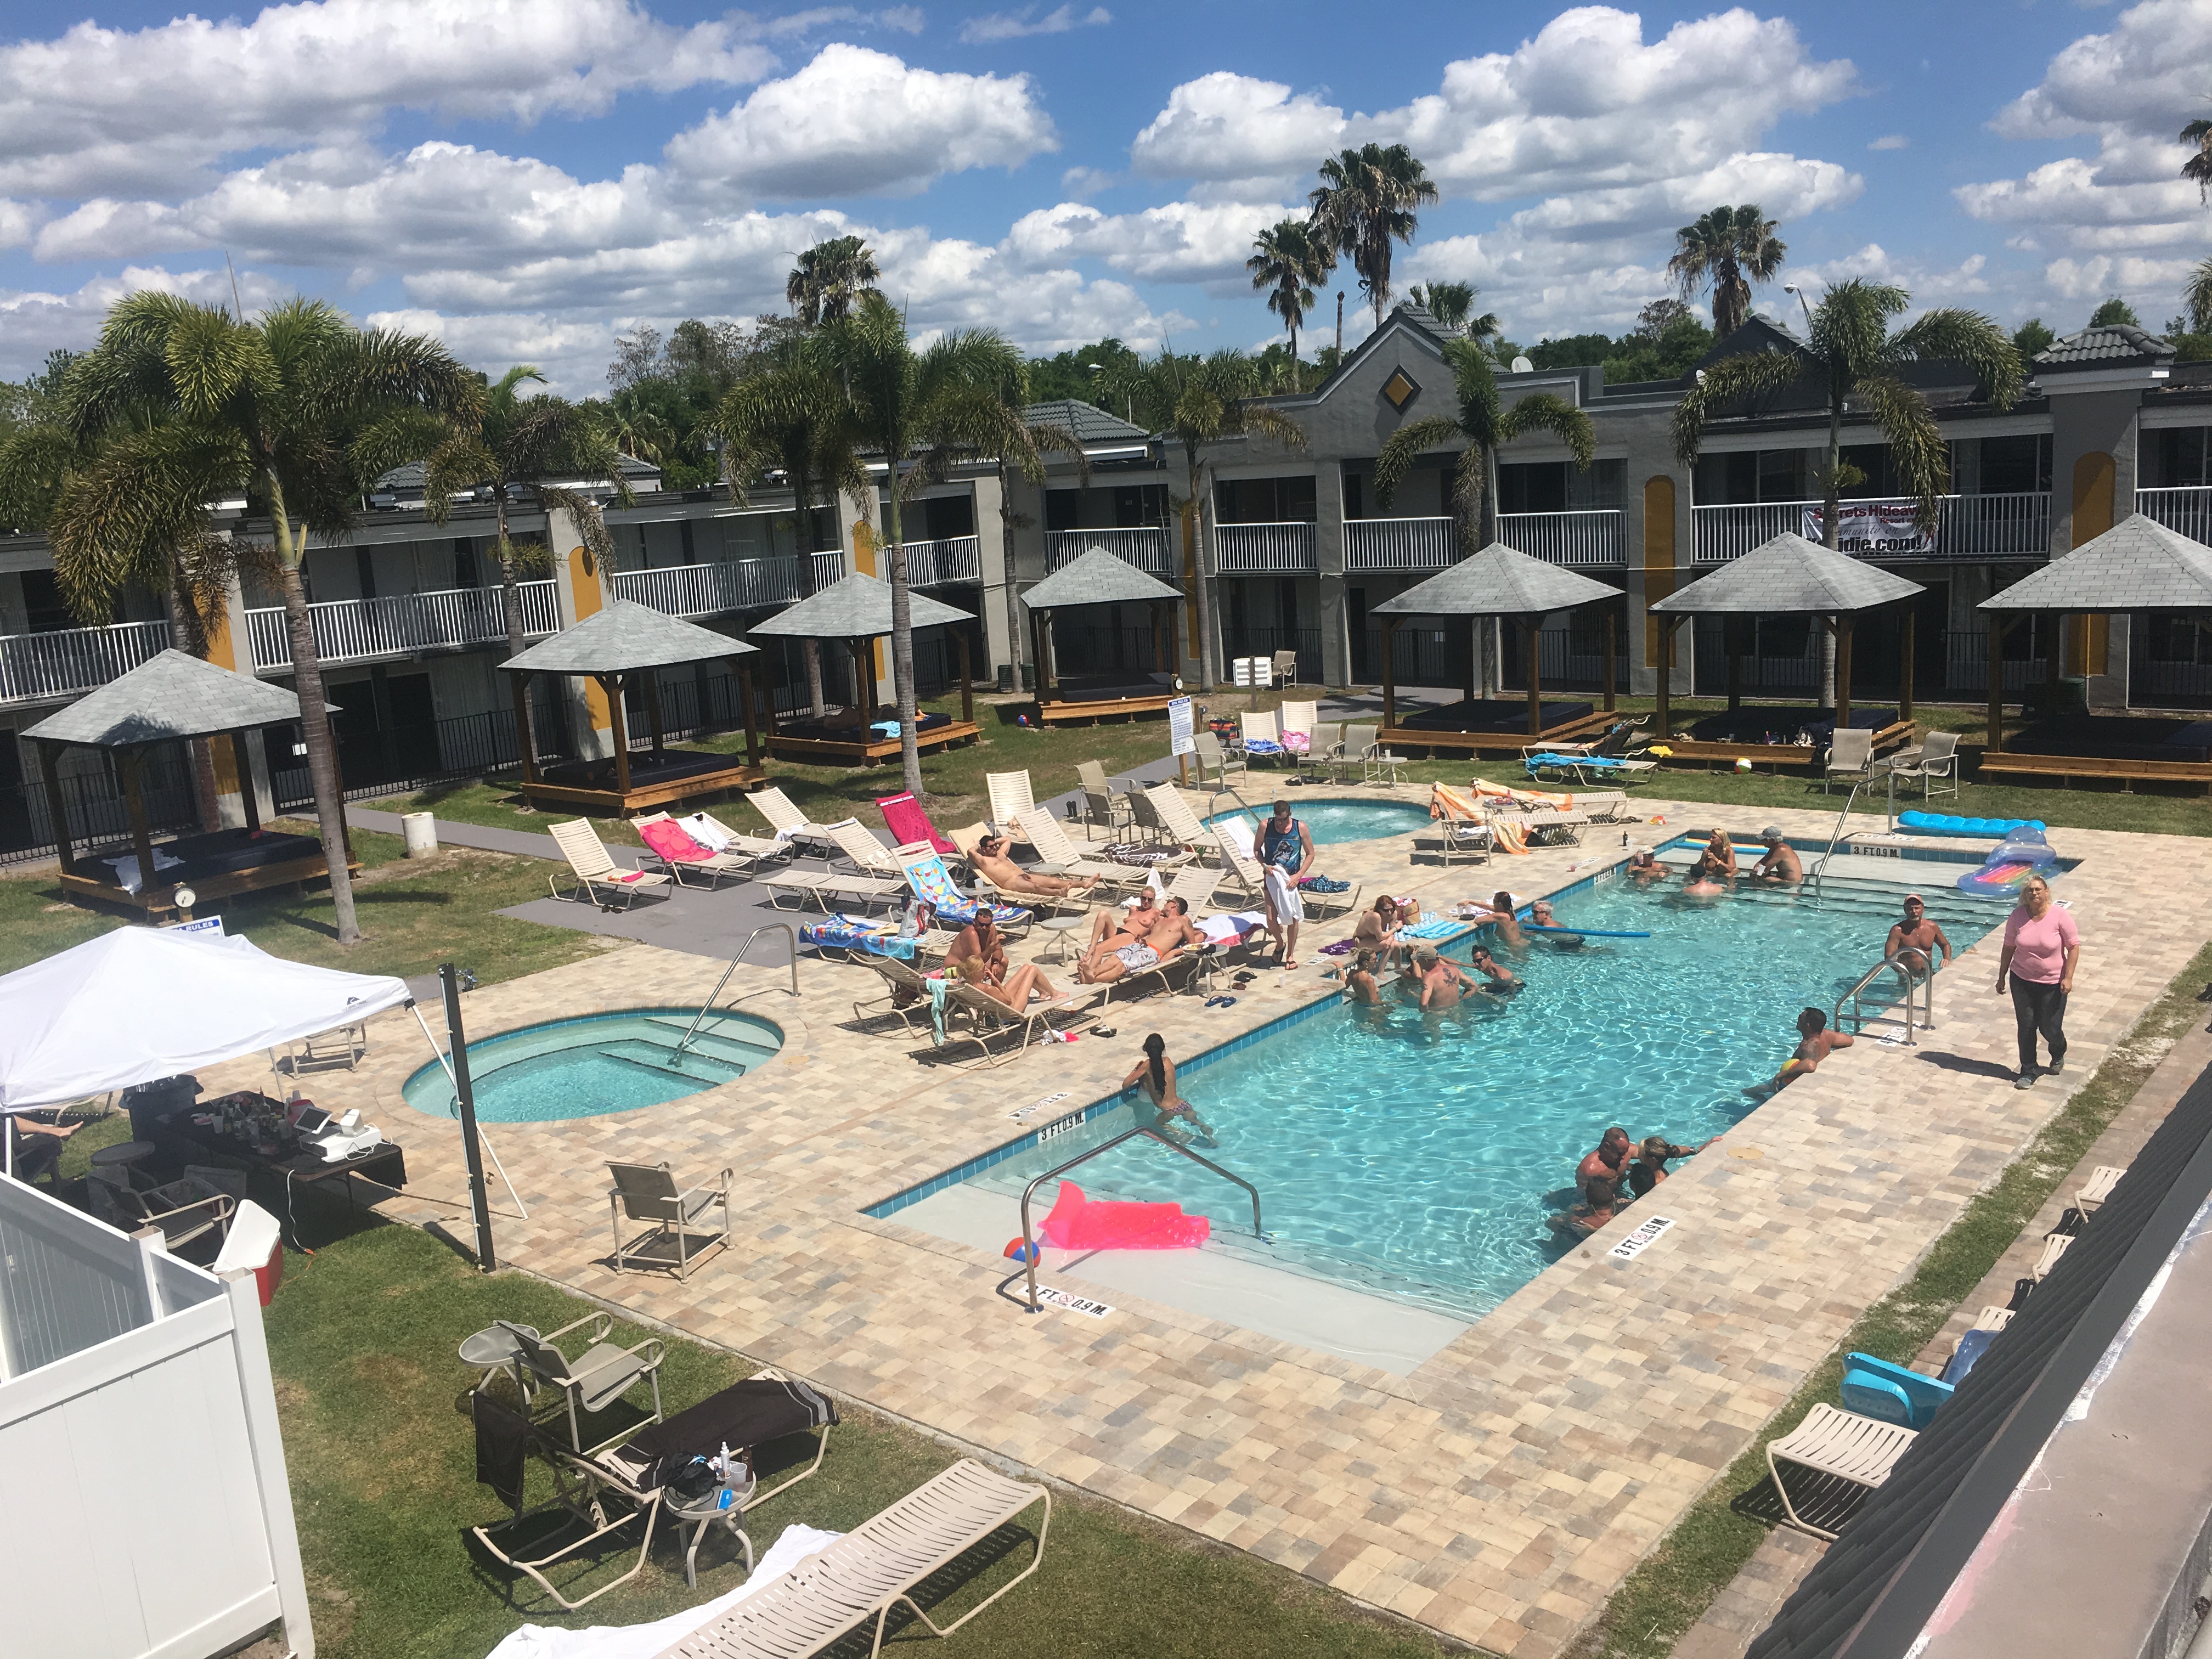 Secrets Hideaway Resort, Florida Lifestyle Condo Hotel, from $39,900 pic